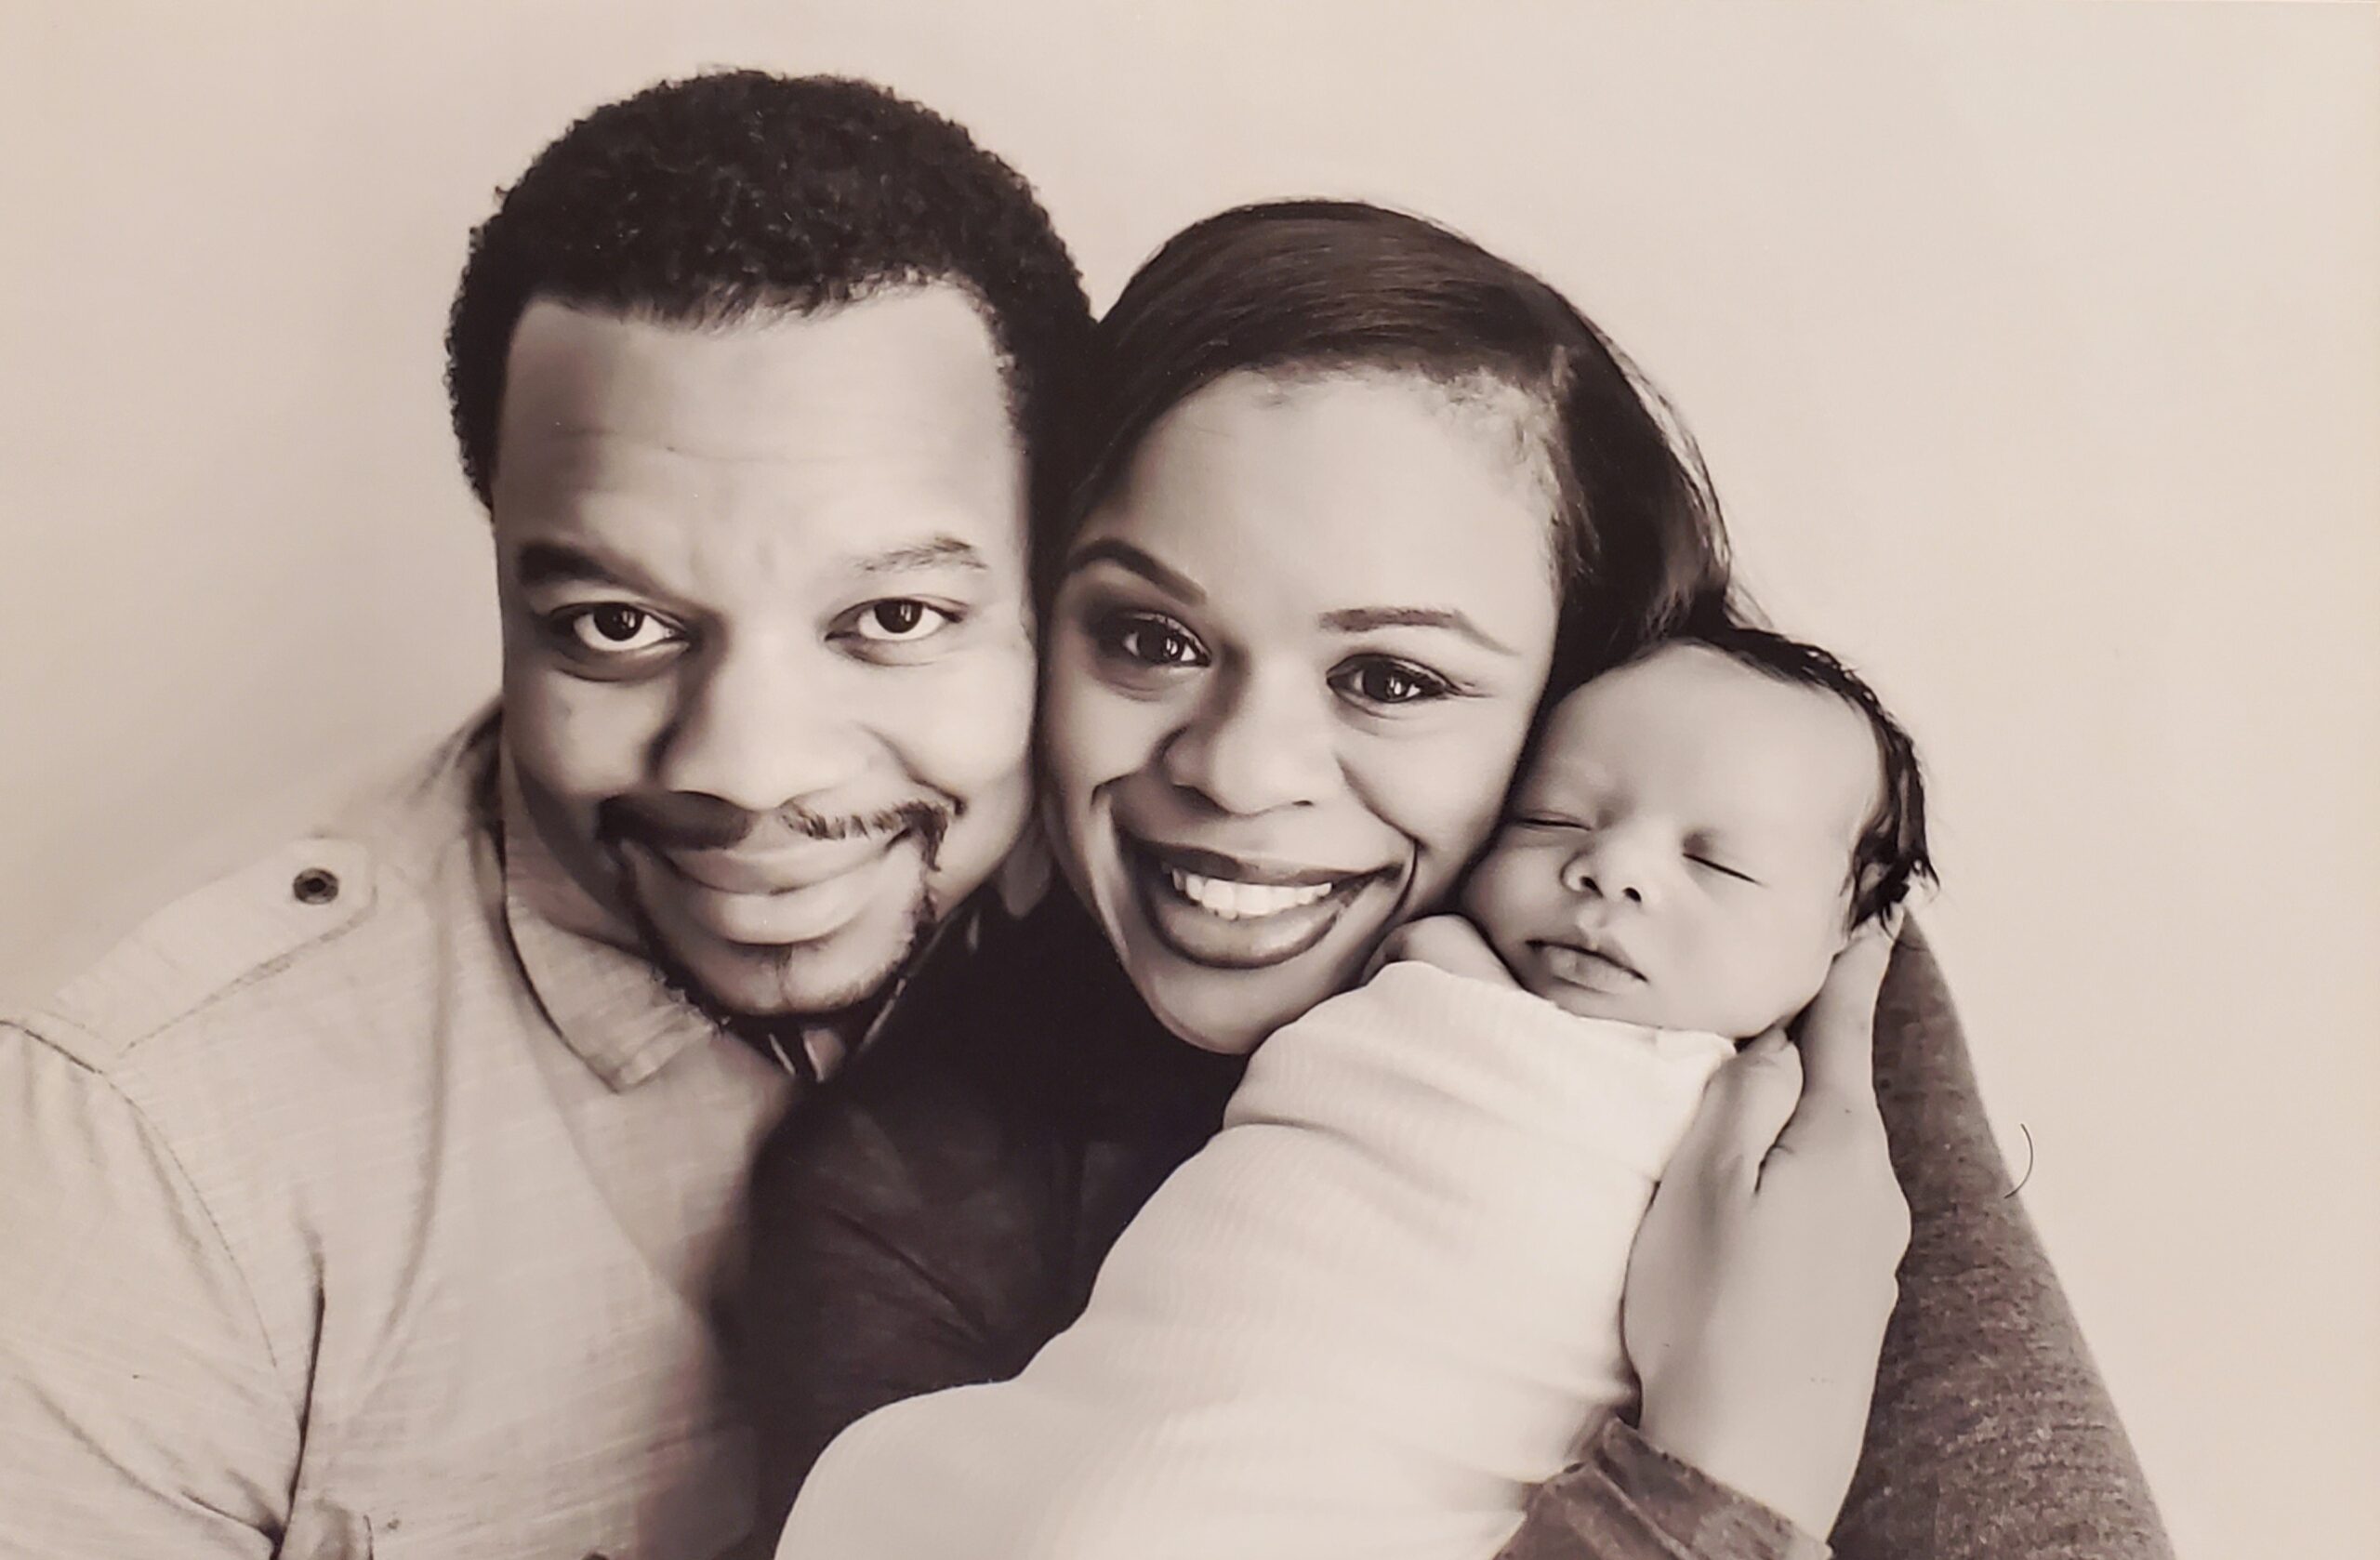 Certified love coach Shay 'Your Love Diva' with her husband and young baby